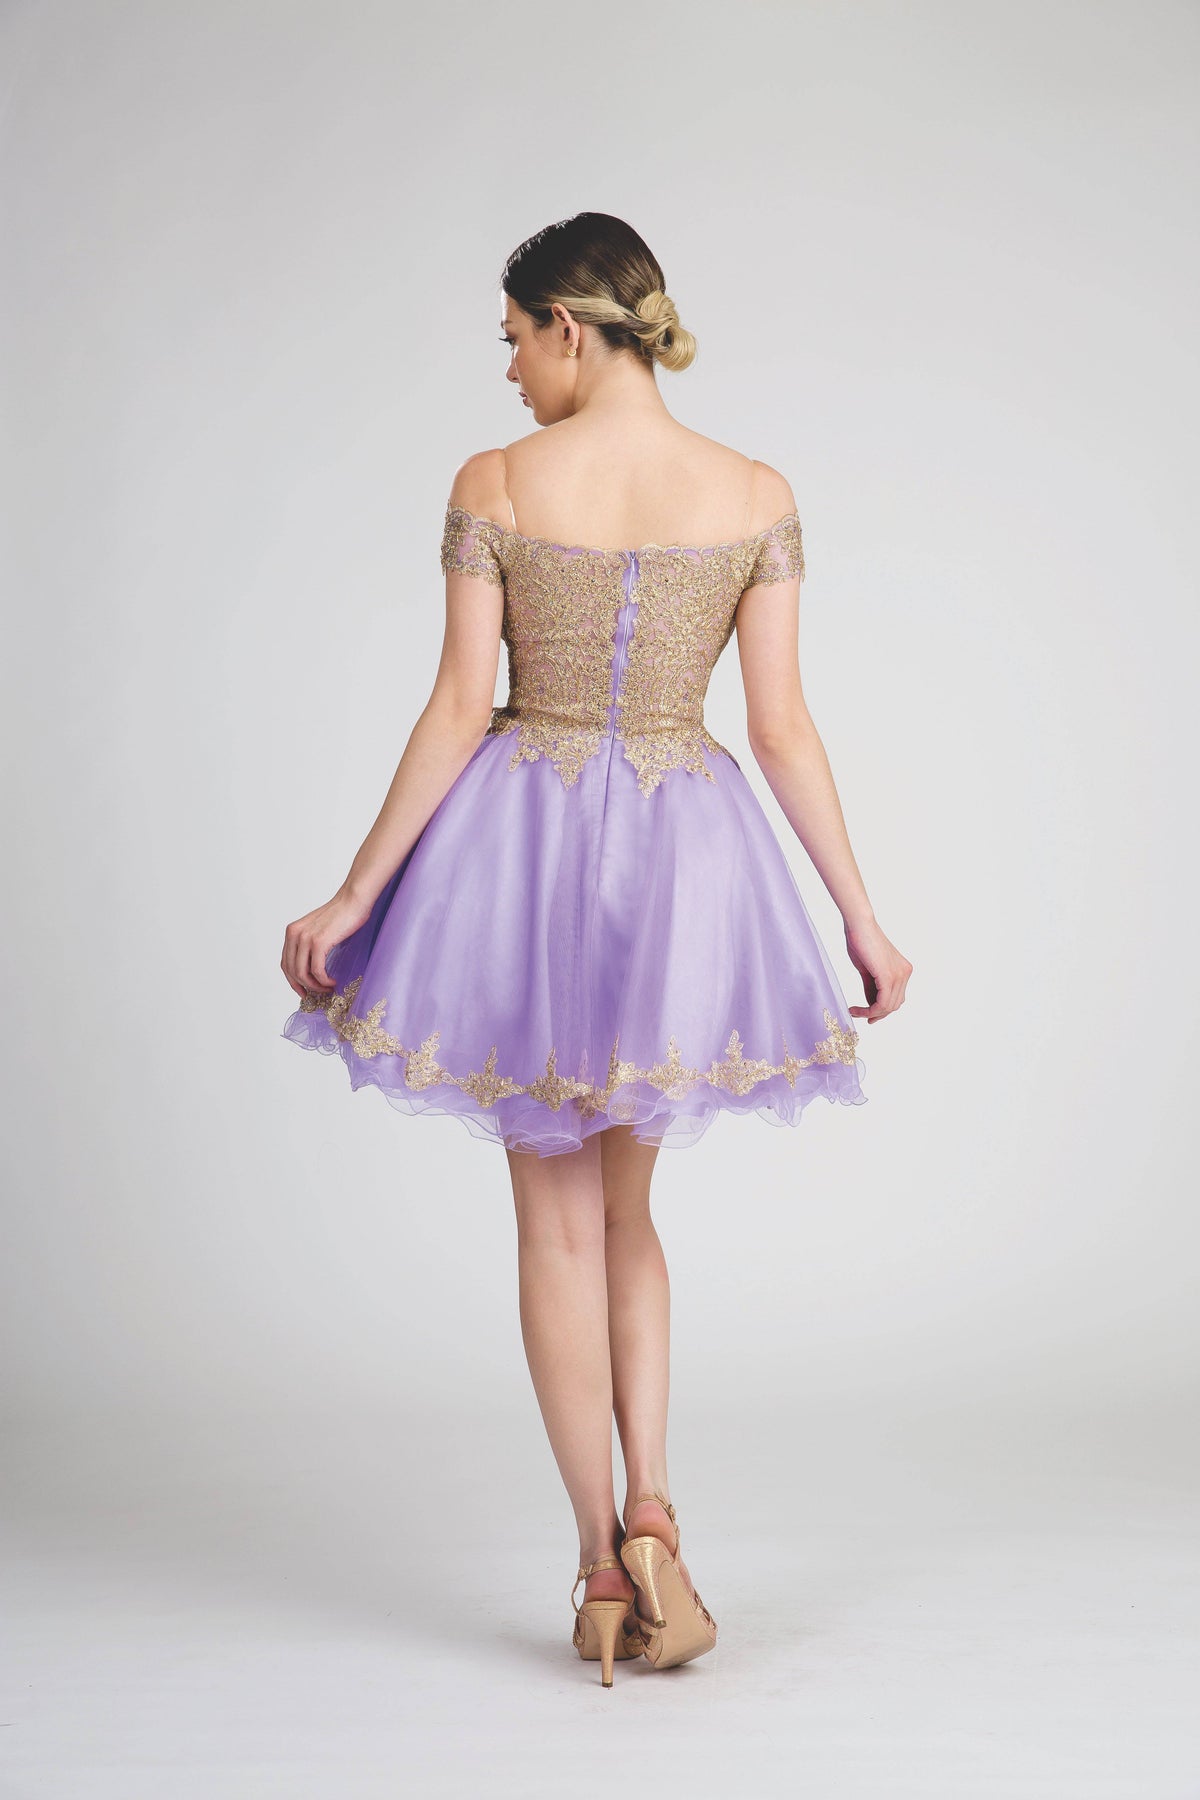 Fiesta 53151 Lace & Crystal Embroidered Lilac Damas Dress | 5 Colors - NORMA REED